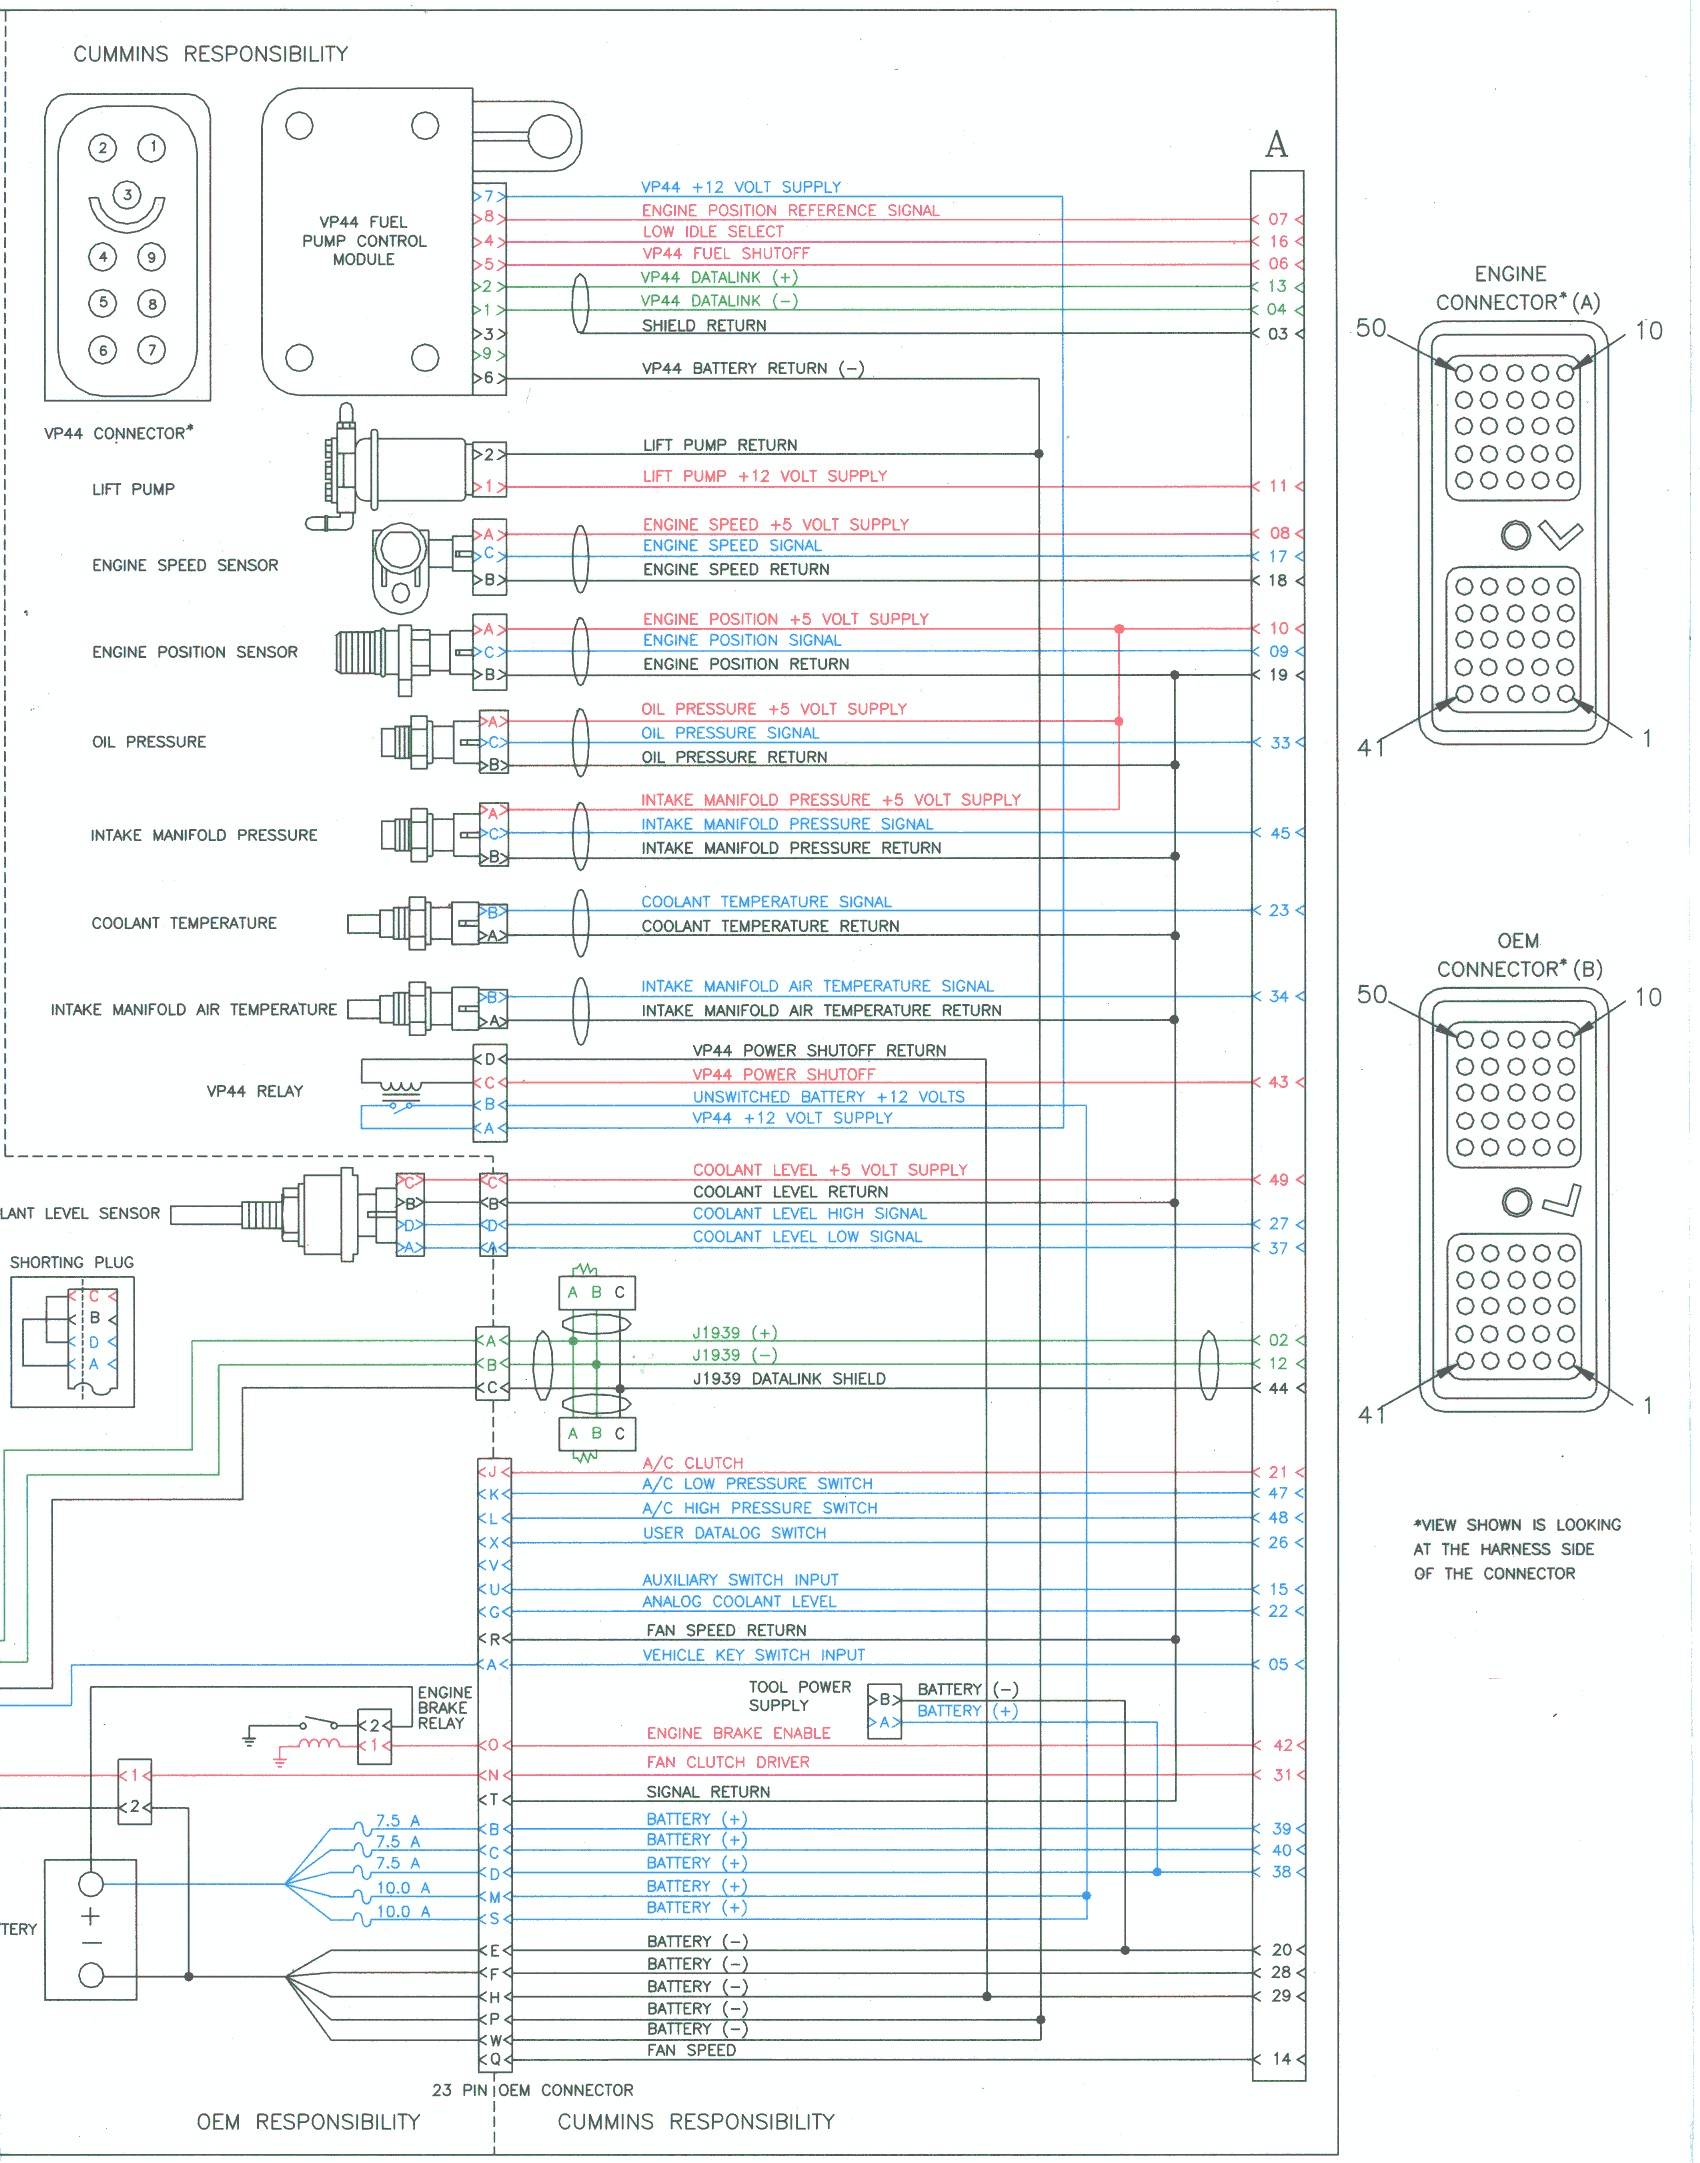 2001 Dodge Ram Wiring Diagram Port to Her with 2006 Dodge Ram 2500 Steering Diagram 2001 Of 2001 Dodge Ram Wiring Diagram